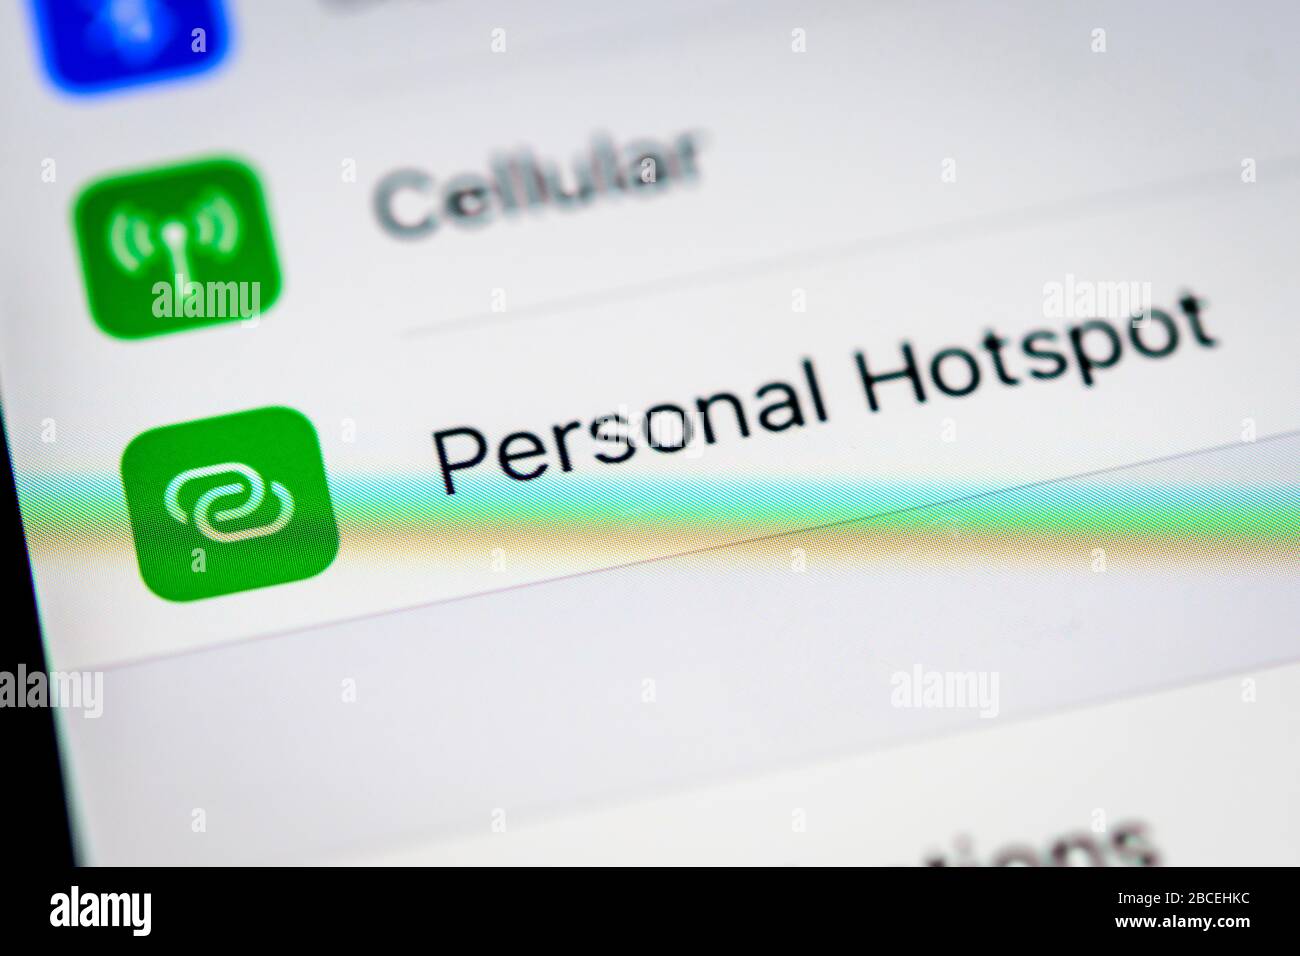 Personal Hotspot, settings on an iPhone, iOS, smartphone, display, close-up, detail Stock Photo